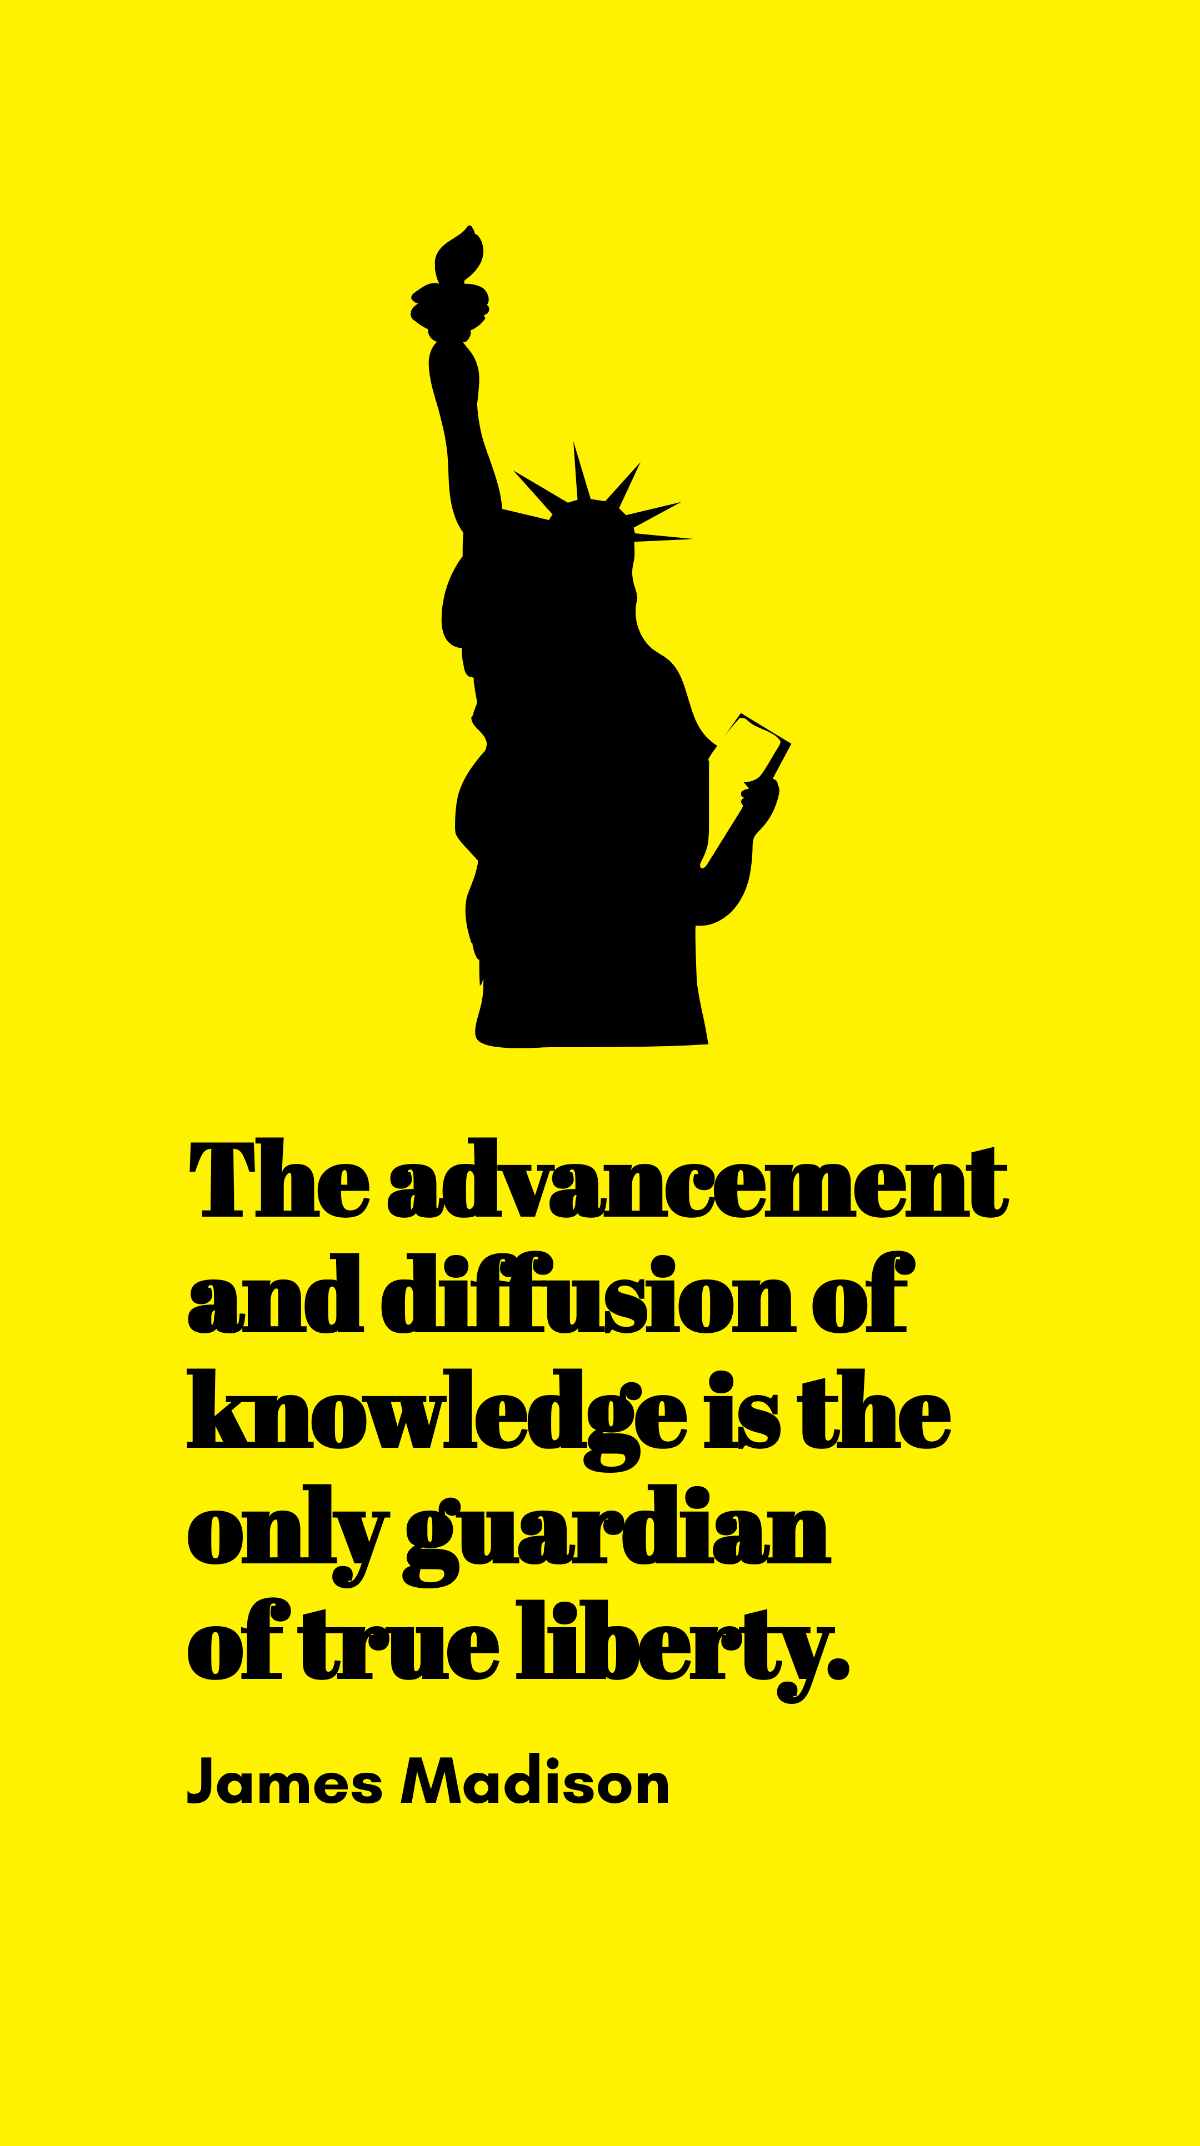 James Madison - The advancement and diffusion of knowledge is the only guardian of true liberty.